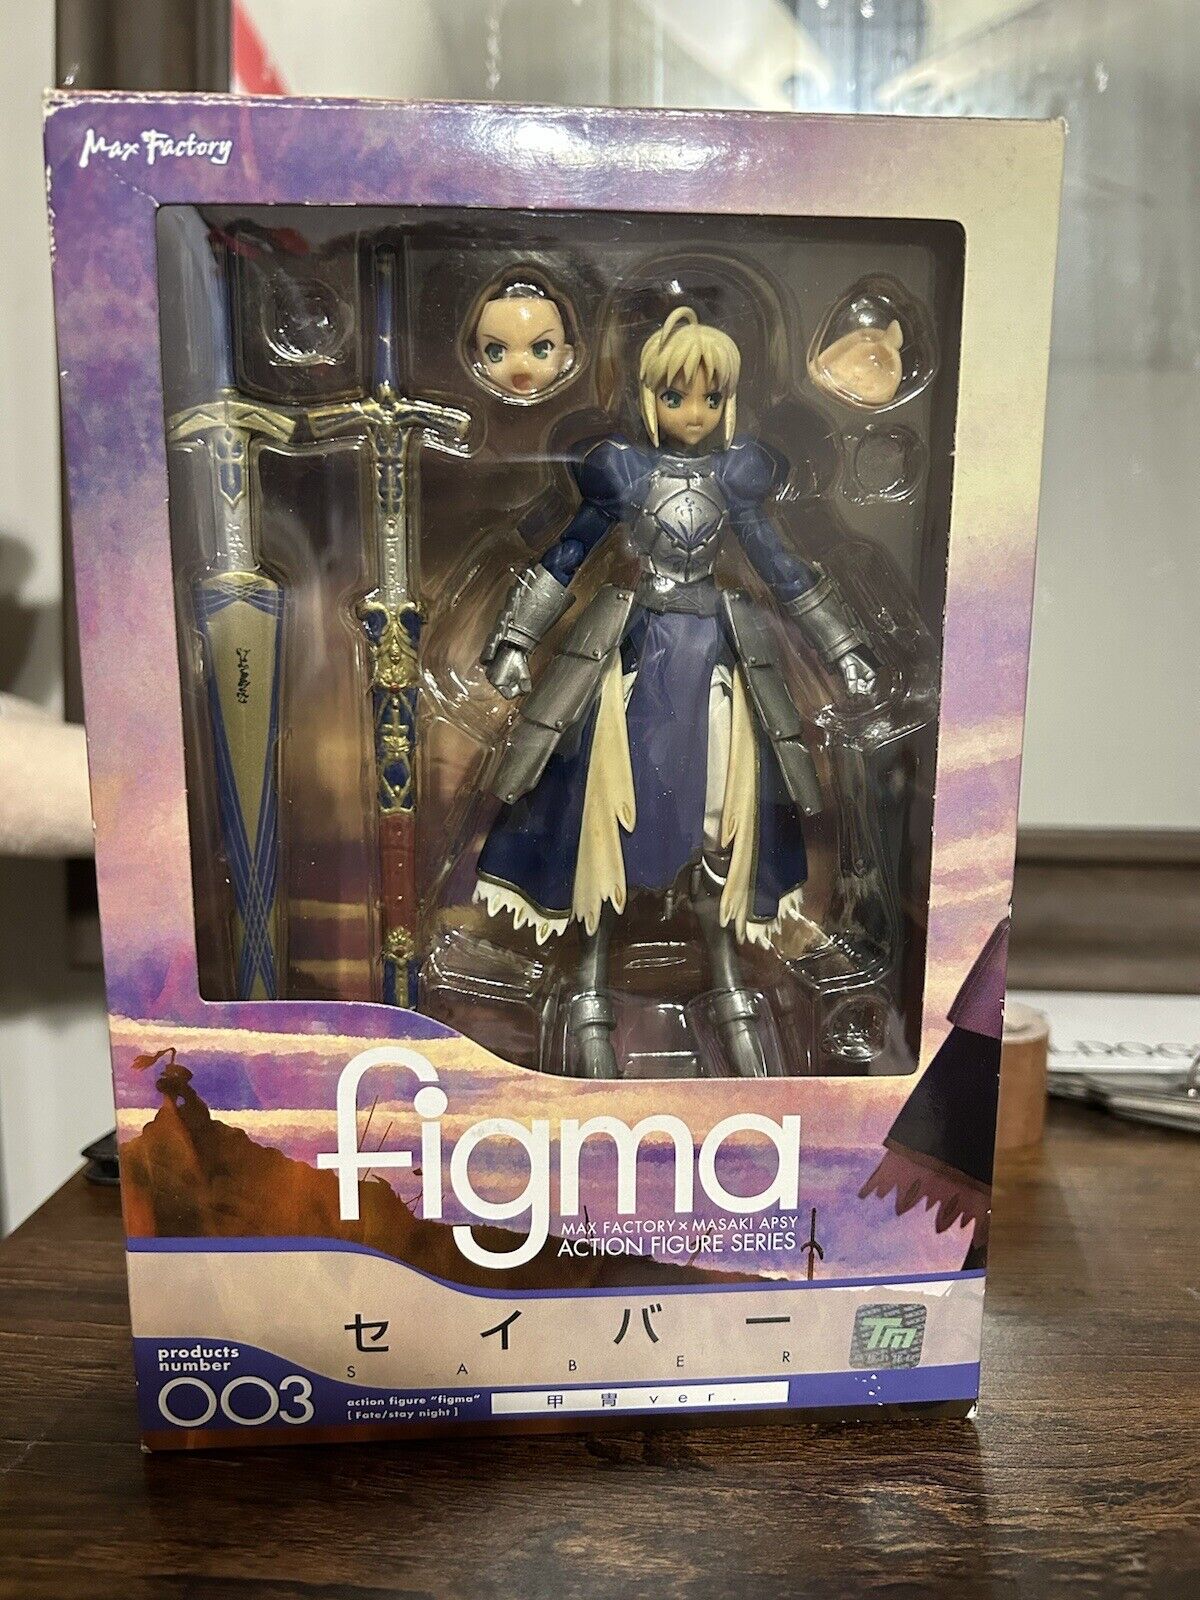 Fate/Stay Night Saber Armor ver. Figma Action Figure 003 Max Factory Japan Toy